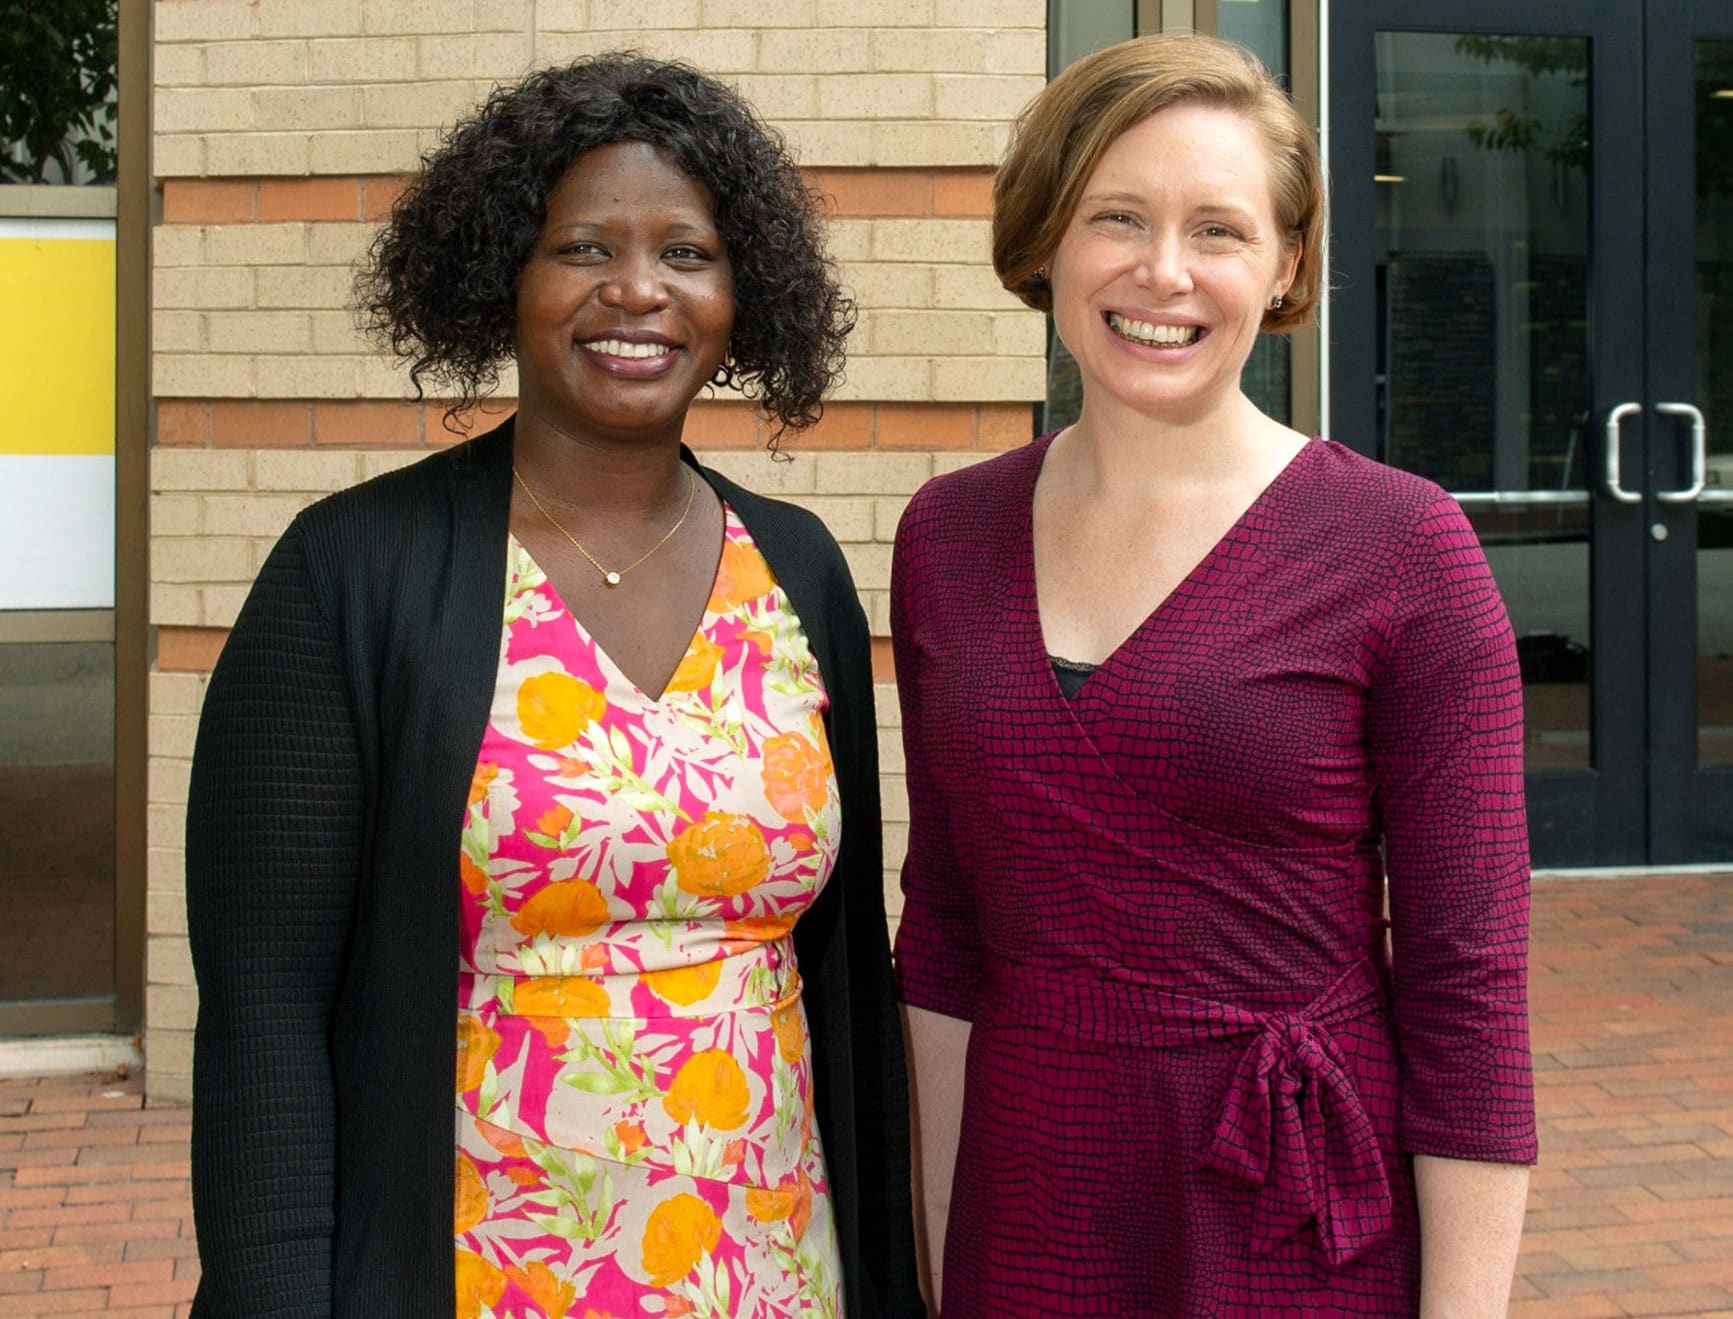 Phoebe Dacha, M.D., and Caitlin Martin, M.D., outside the MOTIVATE Clinic in the Jackson Ward neighborhood of Richmond.